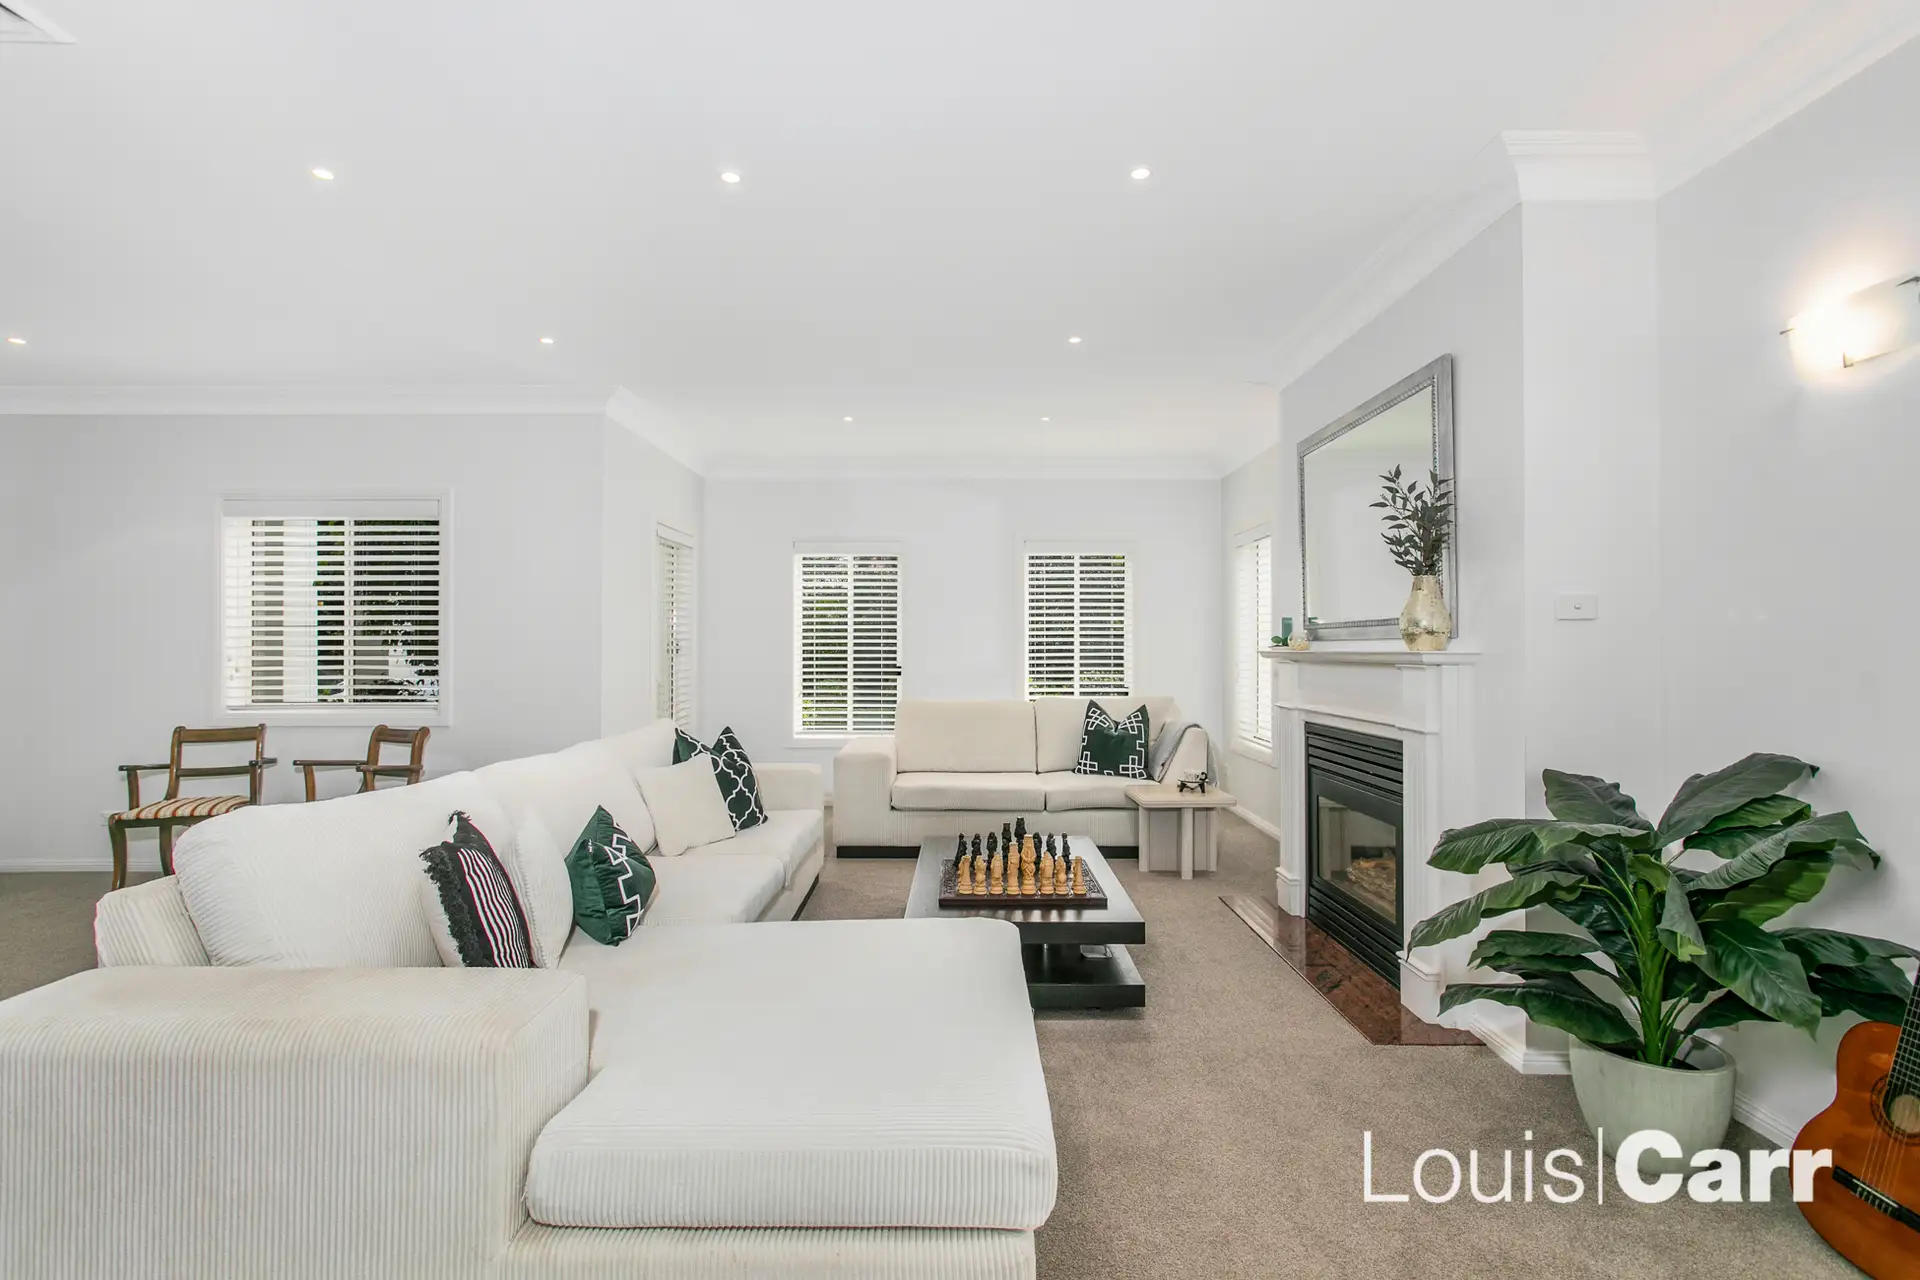 Photo #7: 4 Governor Phillip Place, West Pennant Hills - Sold by Louis Carr Real Estate